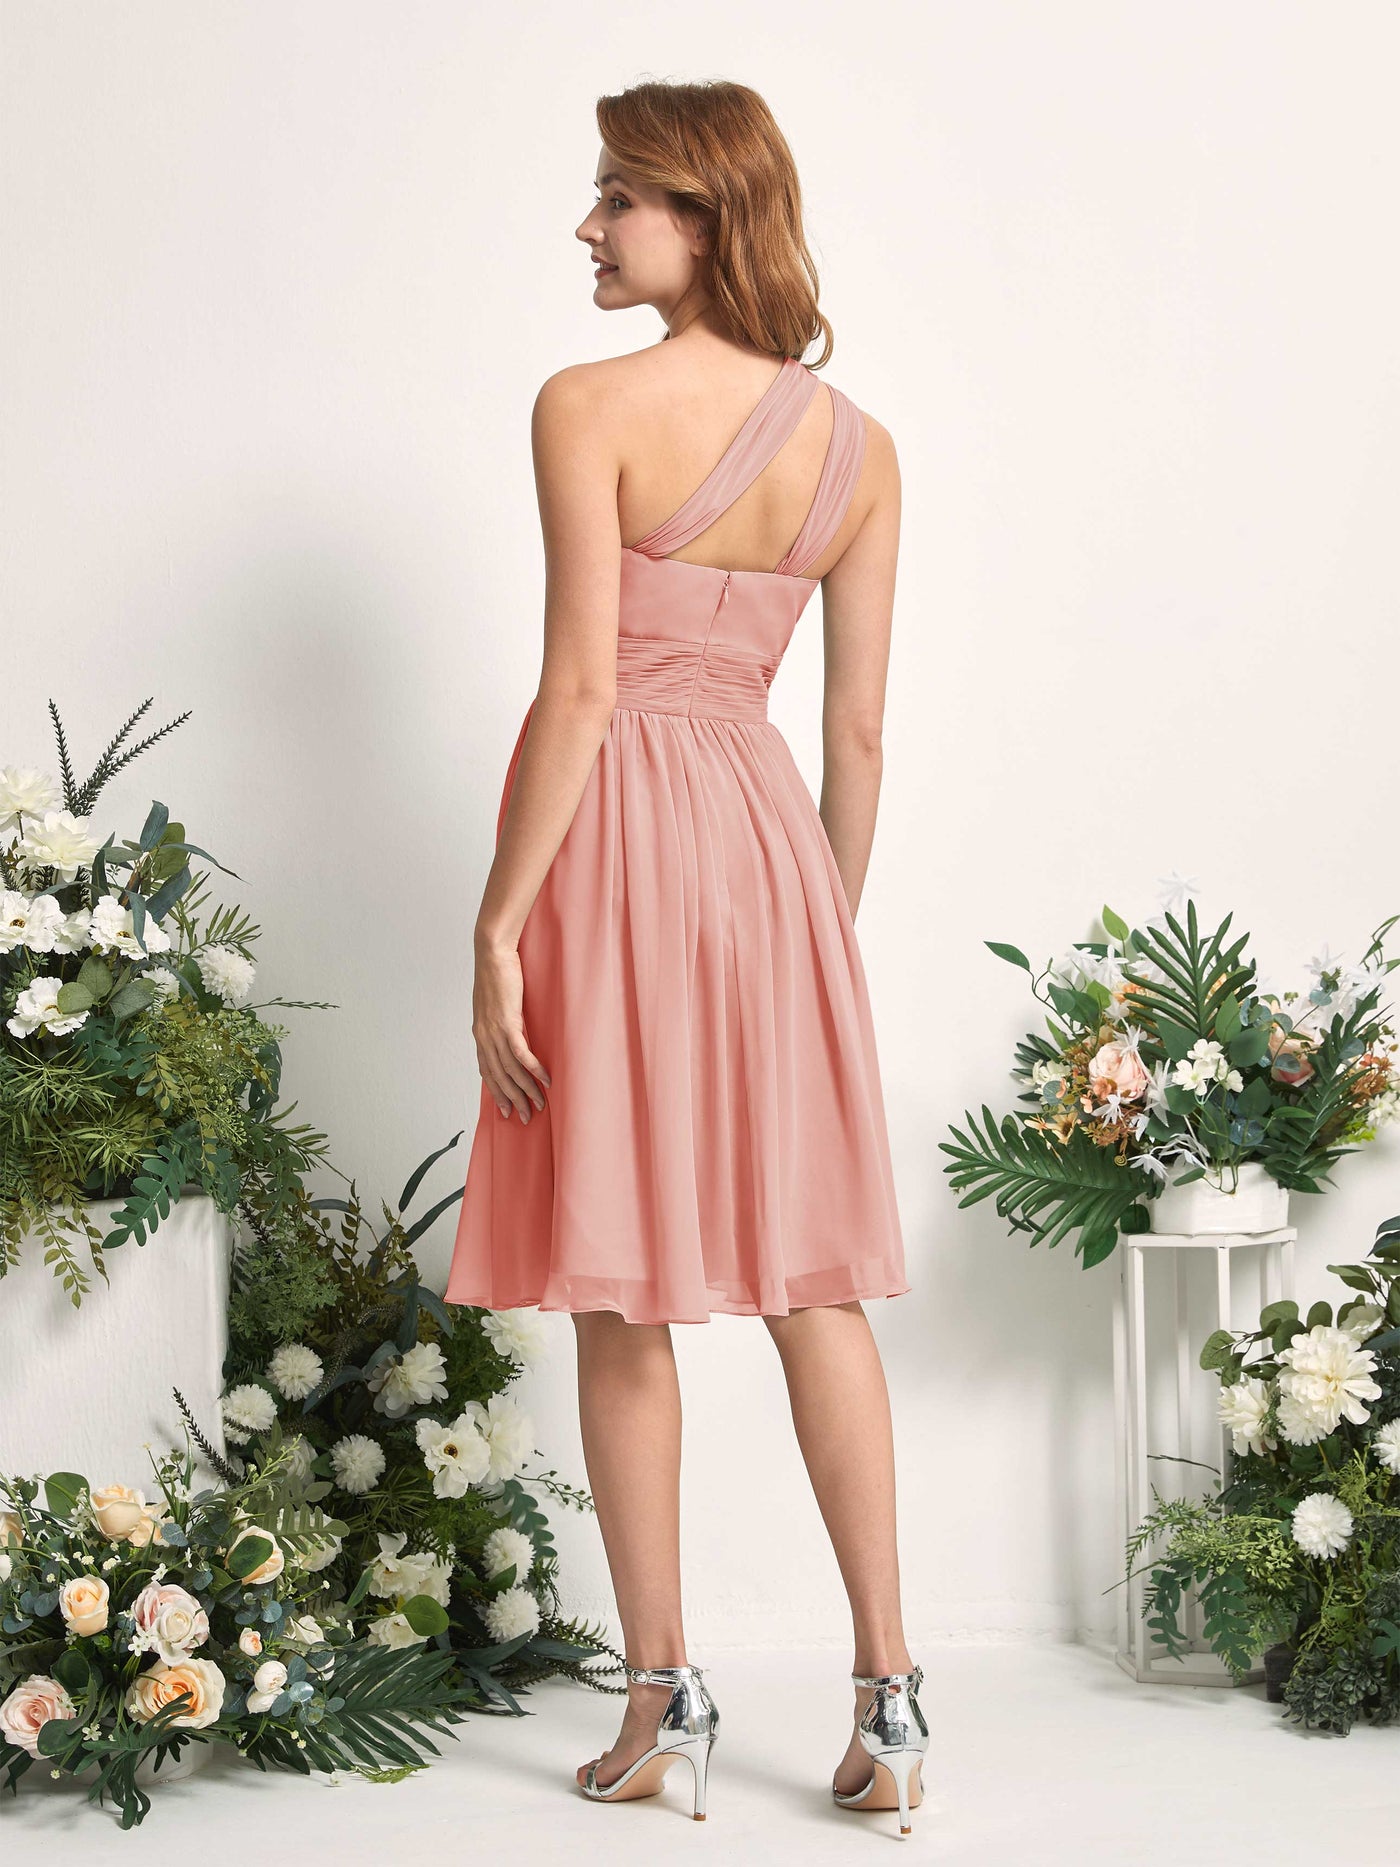 Bridesmaid Dress A-line Chiffon One Shoulder Knee Length Sleeveless Wedding Party Dress - Champagne Rose (81221206)#color_champagne-rose